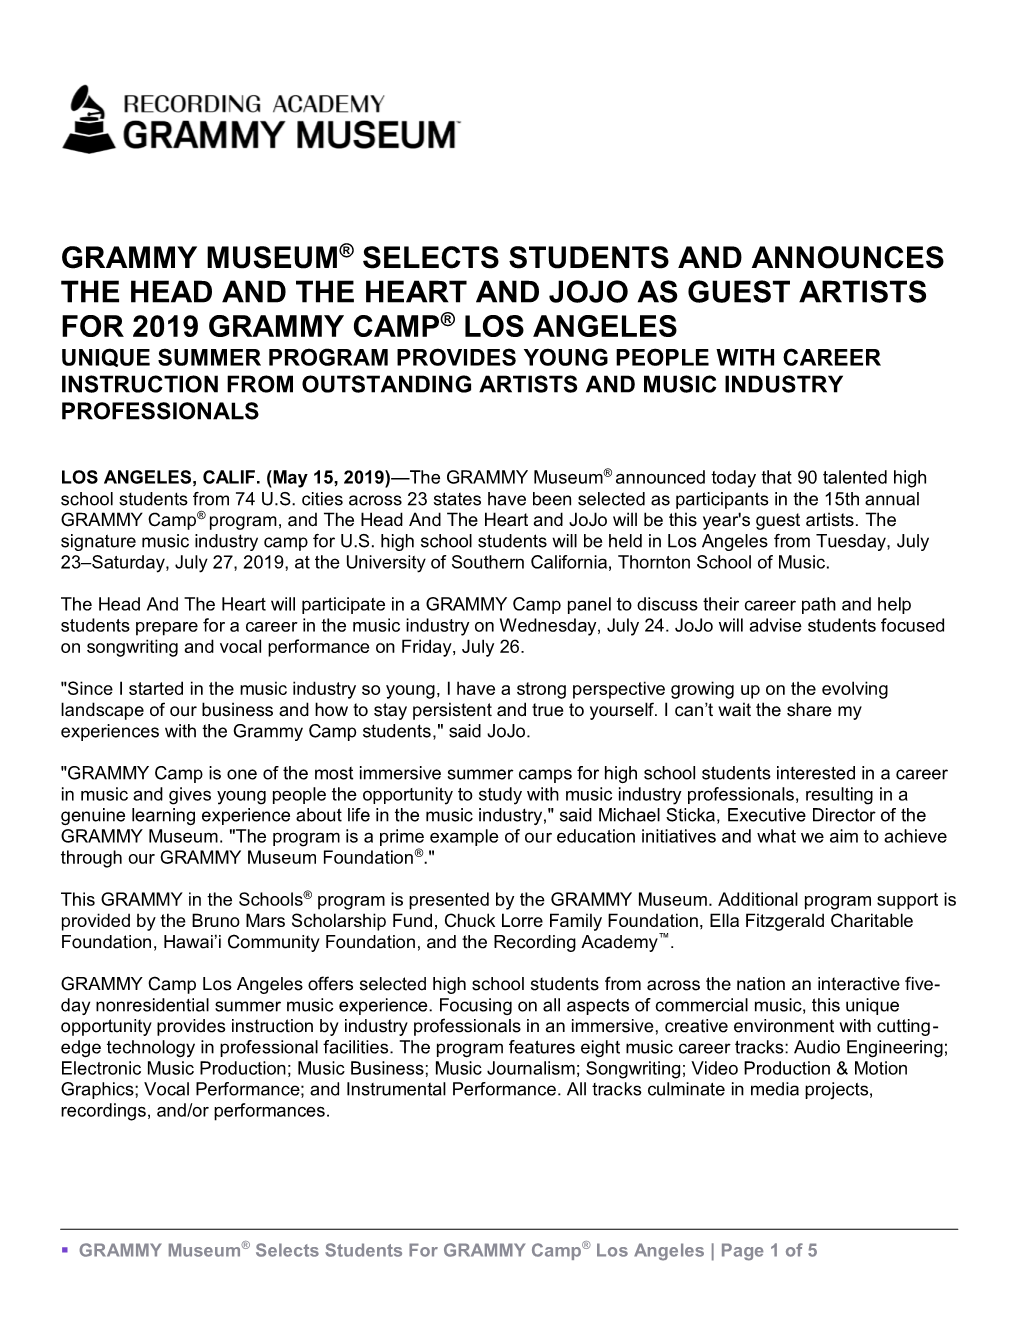 Grammy Museum® Selects Students and Announces the Head and the Heart and Jojo As Guest Artists for 2019 Grammy Camp® Los Angel